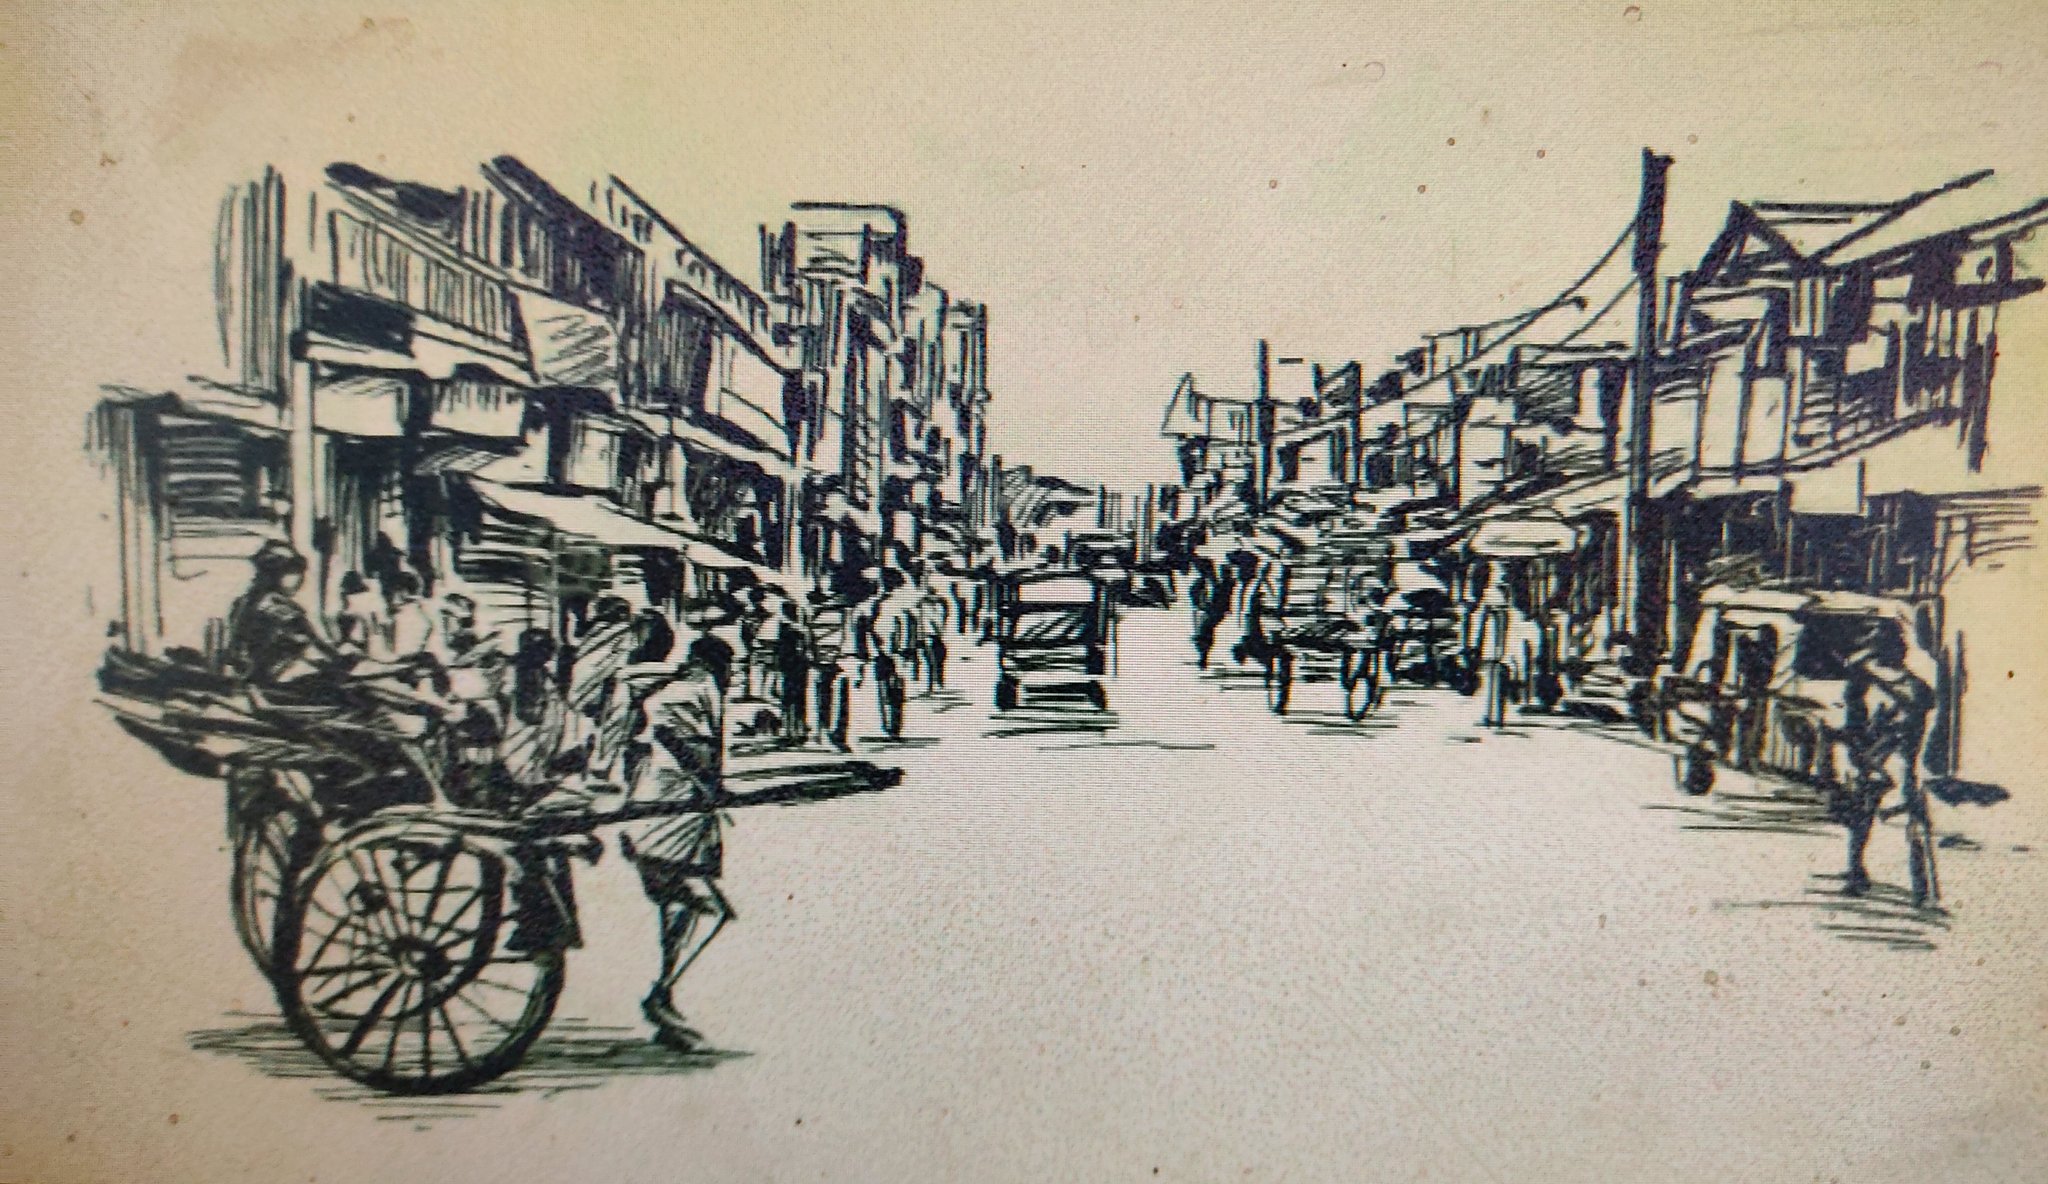 Colours & Strokes - Kolkata ache Kolkata tei. Amar Sohor Just a pencil  sketch remembering the hustle bustle of my favourite city which is right  now busy fighting with the pandemic. But